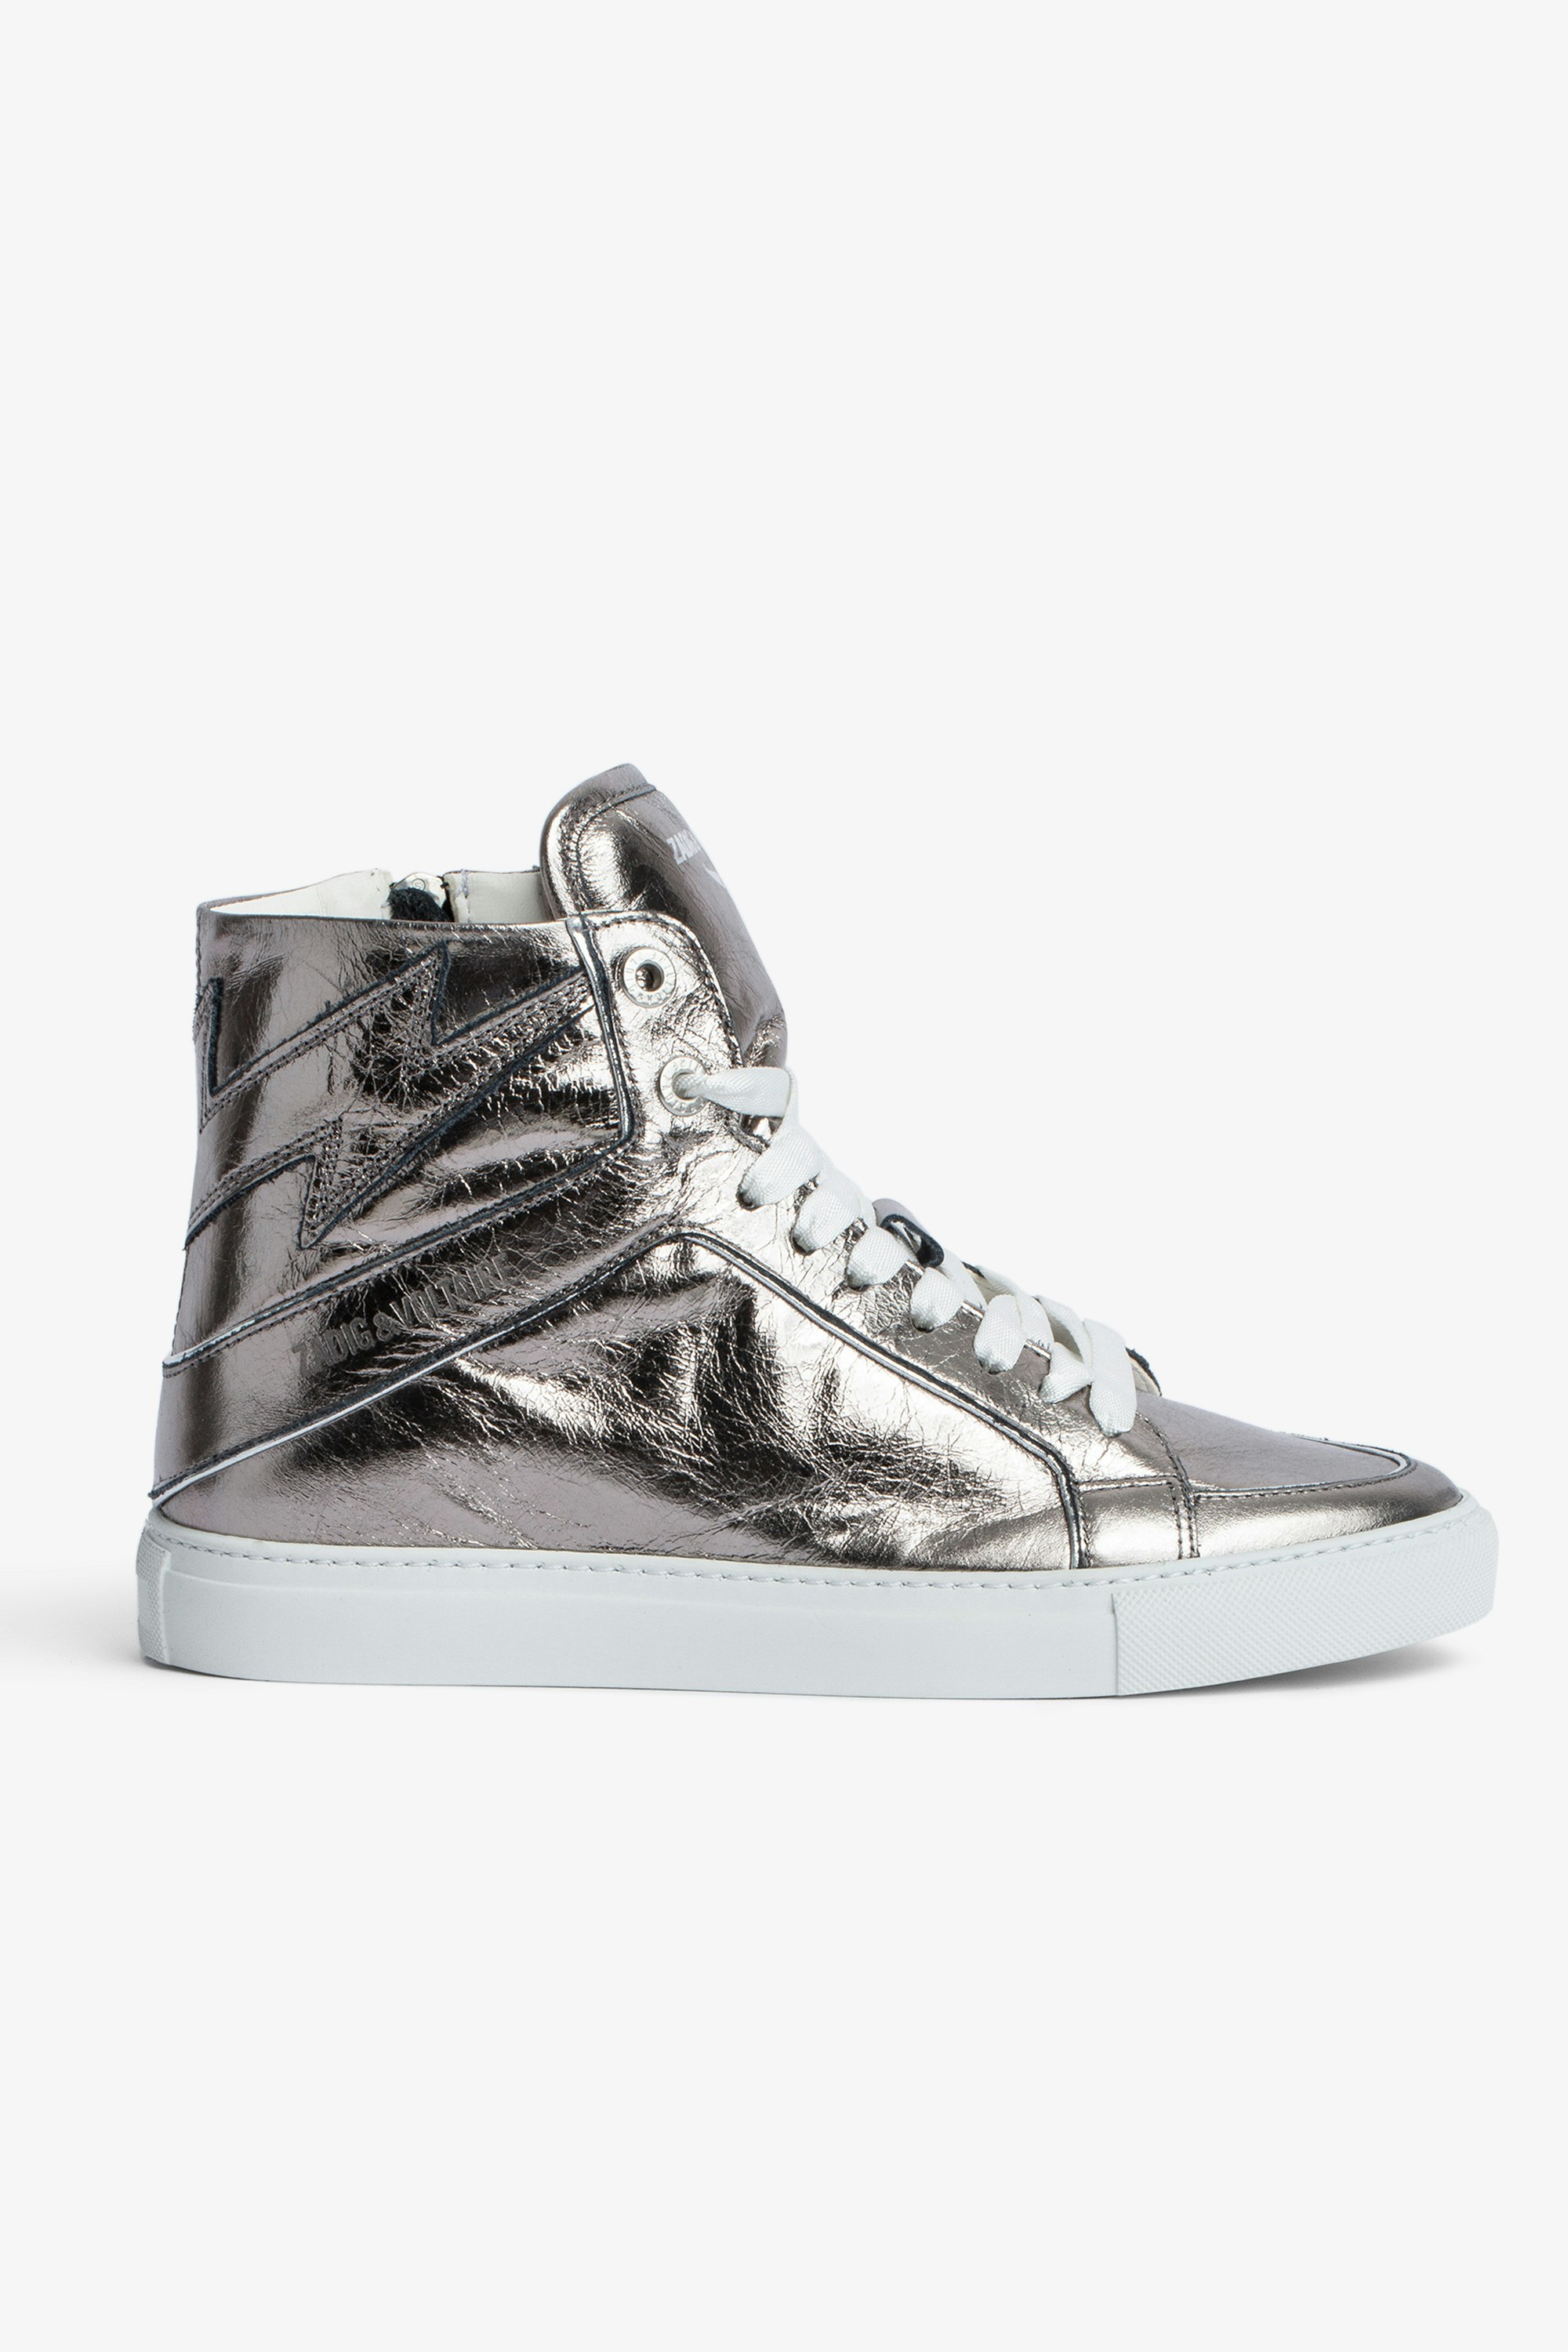 ZV1747 High Flash スニーカー Silver metallic leather high-top sneakers 